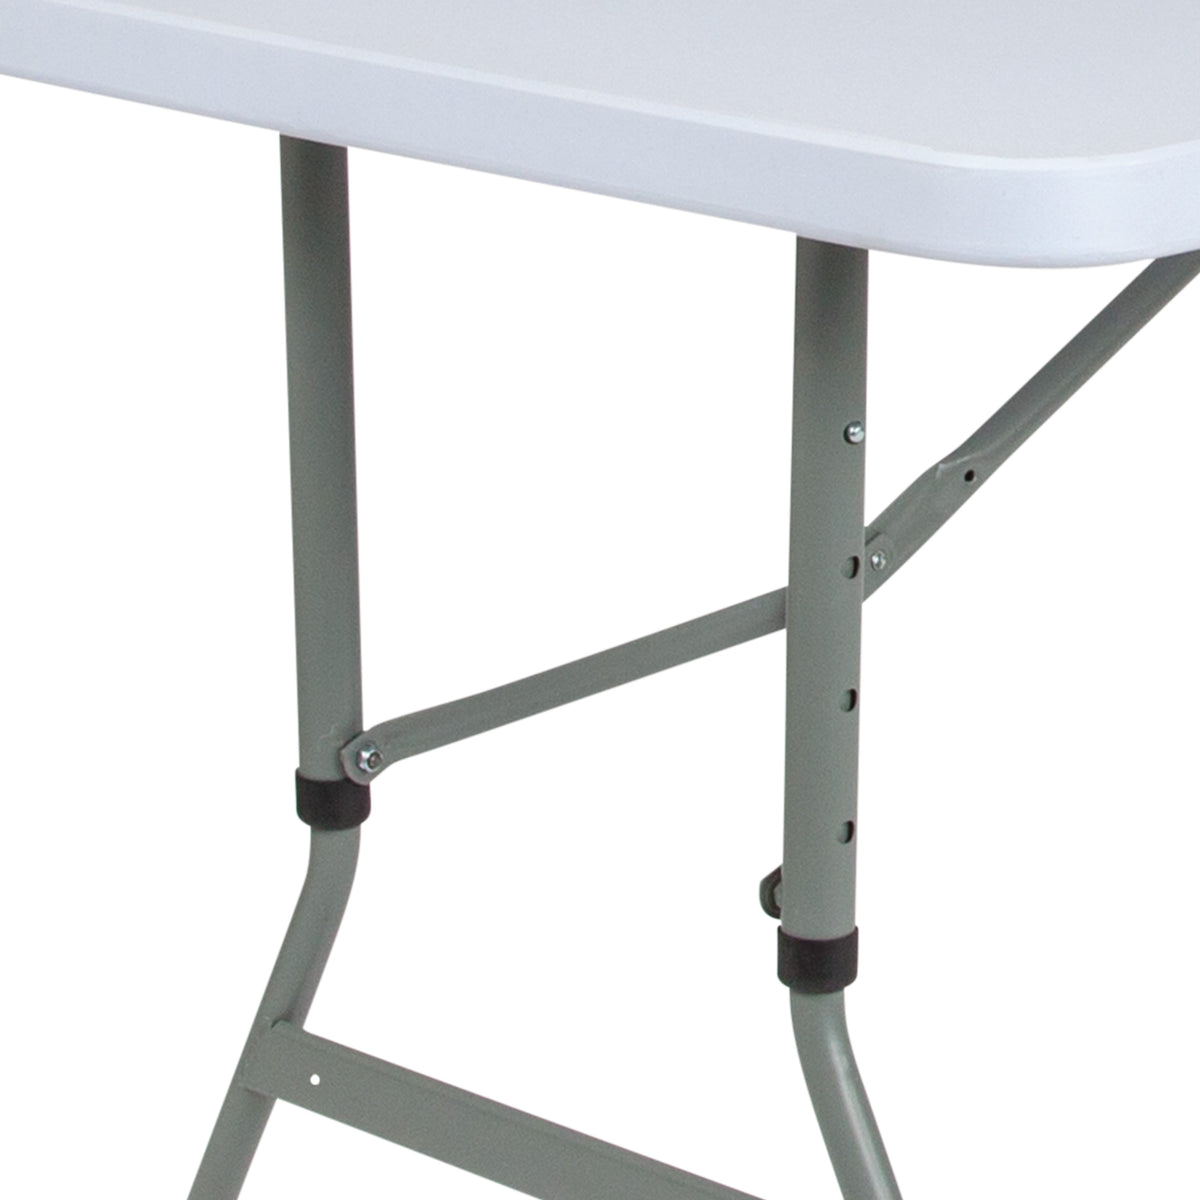 4.93-Foot Height Adjustable Granite White Plastic Folding Table - Activity Table